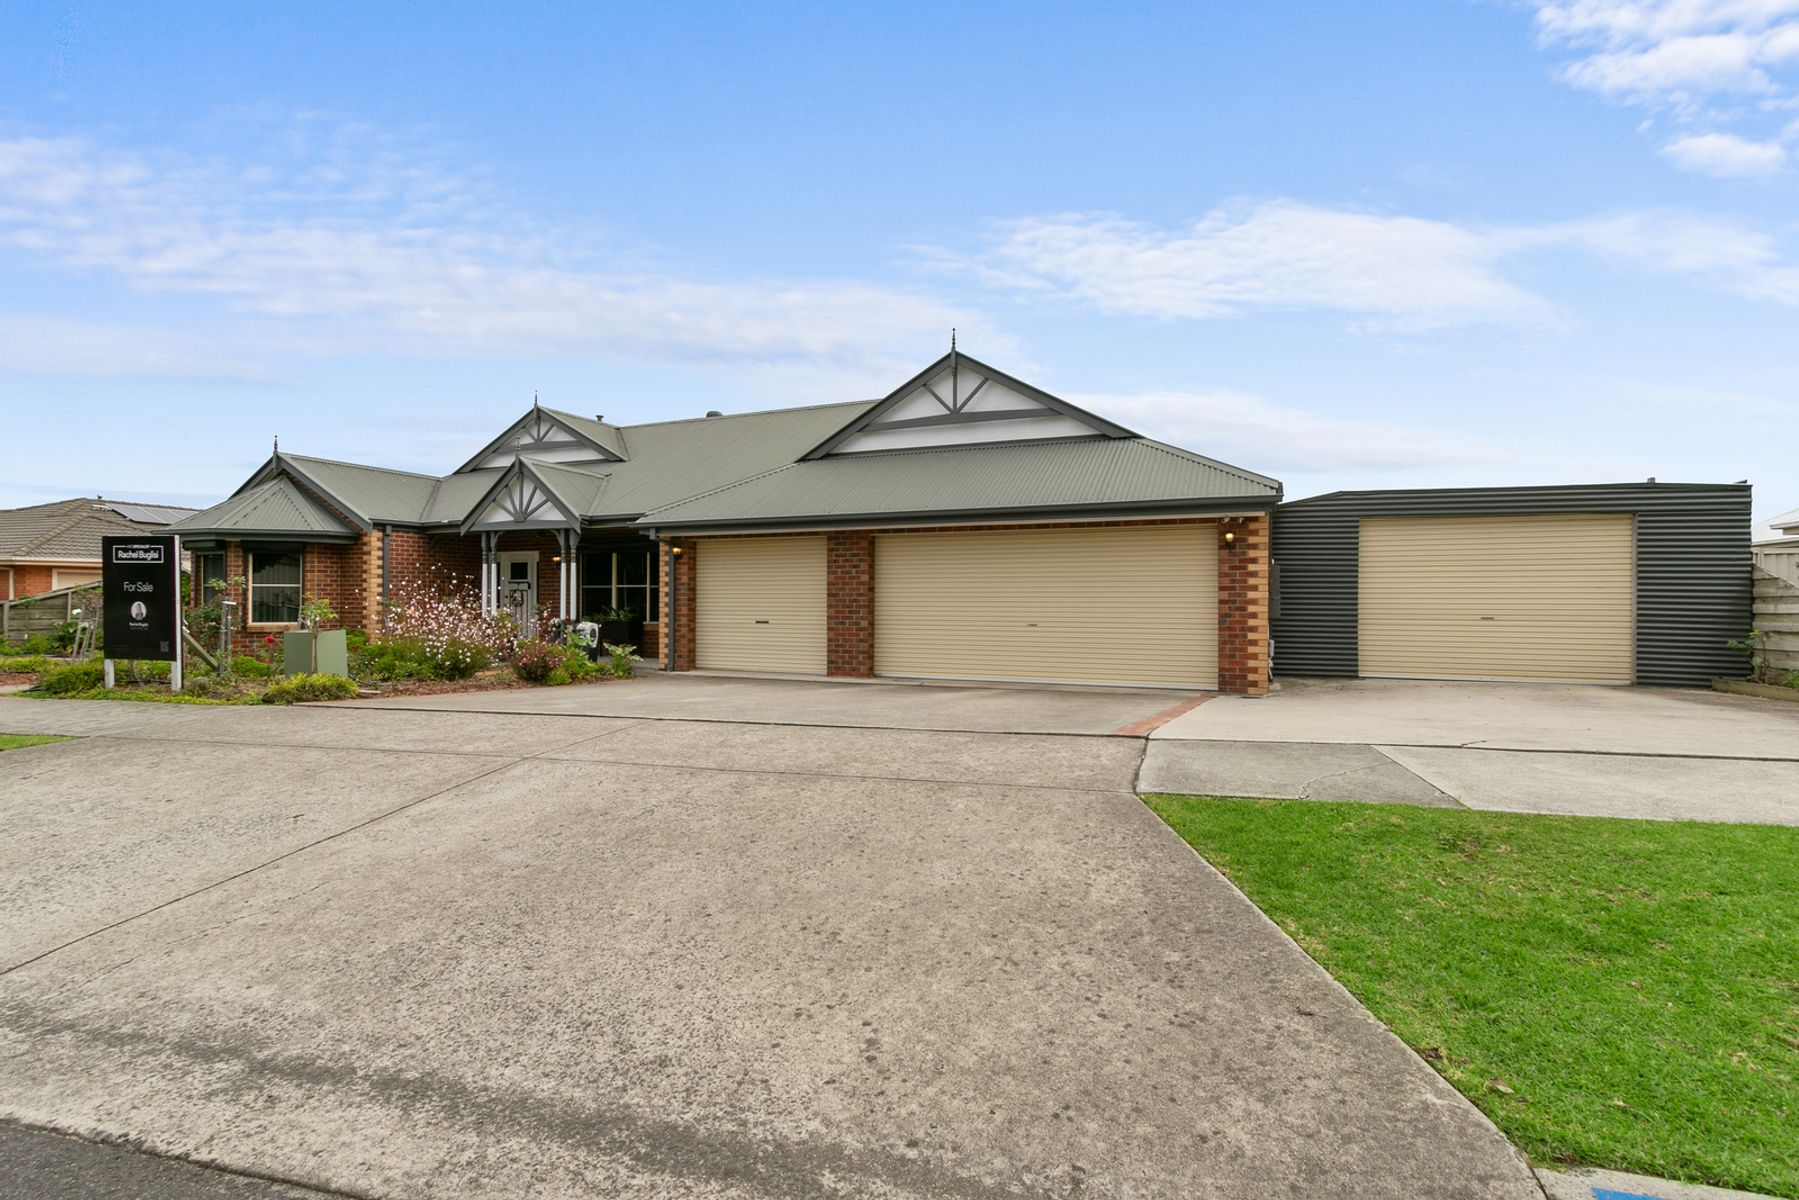 004 Open2view ID878910 62 Greenfield Drive   Traralgon